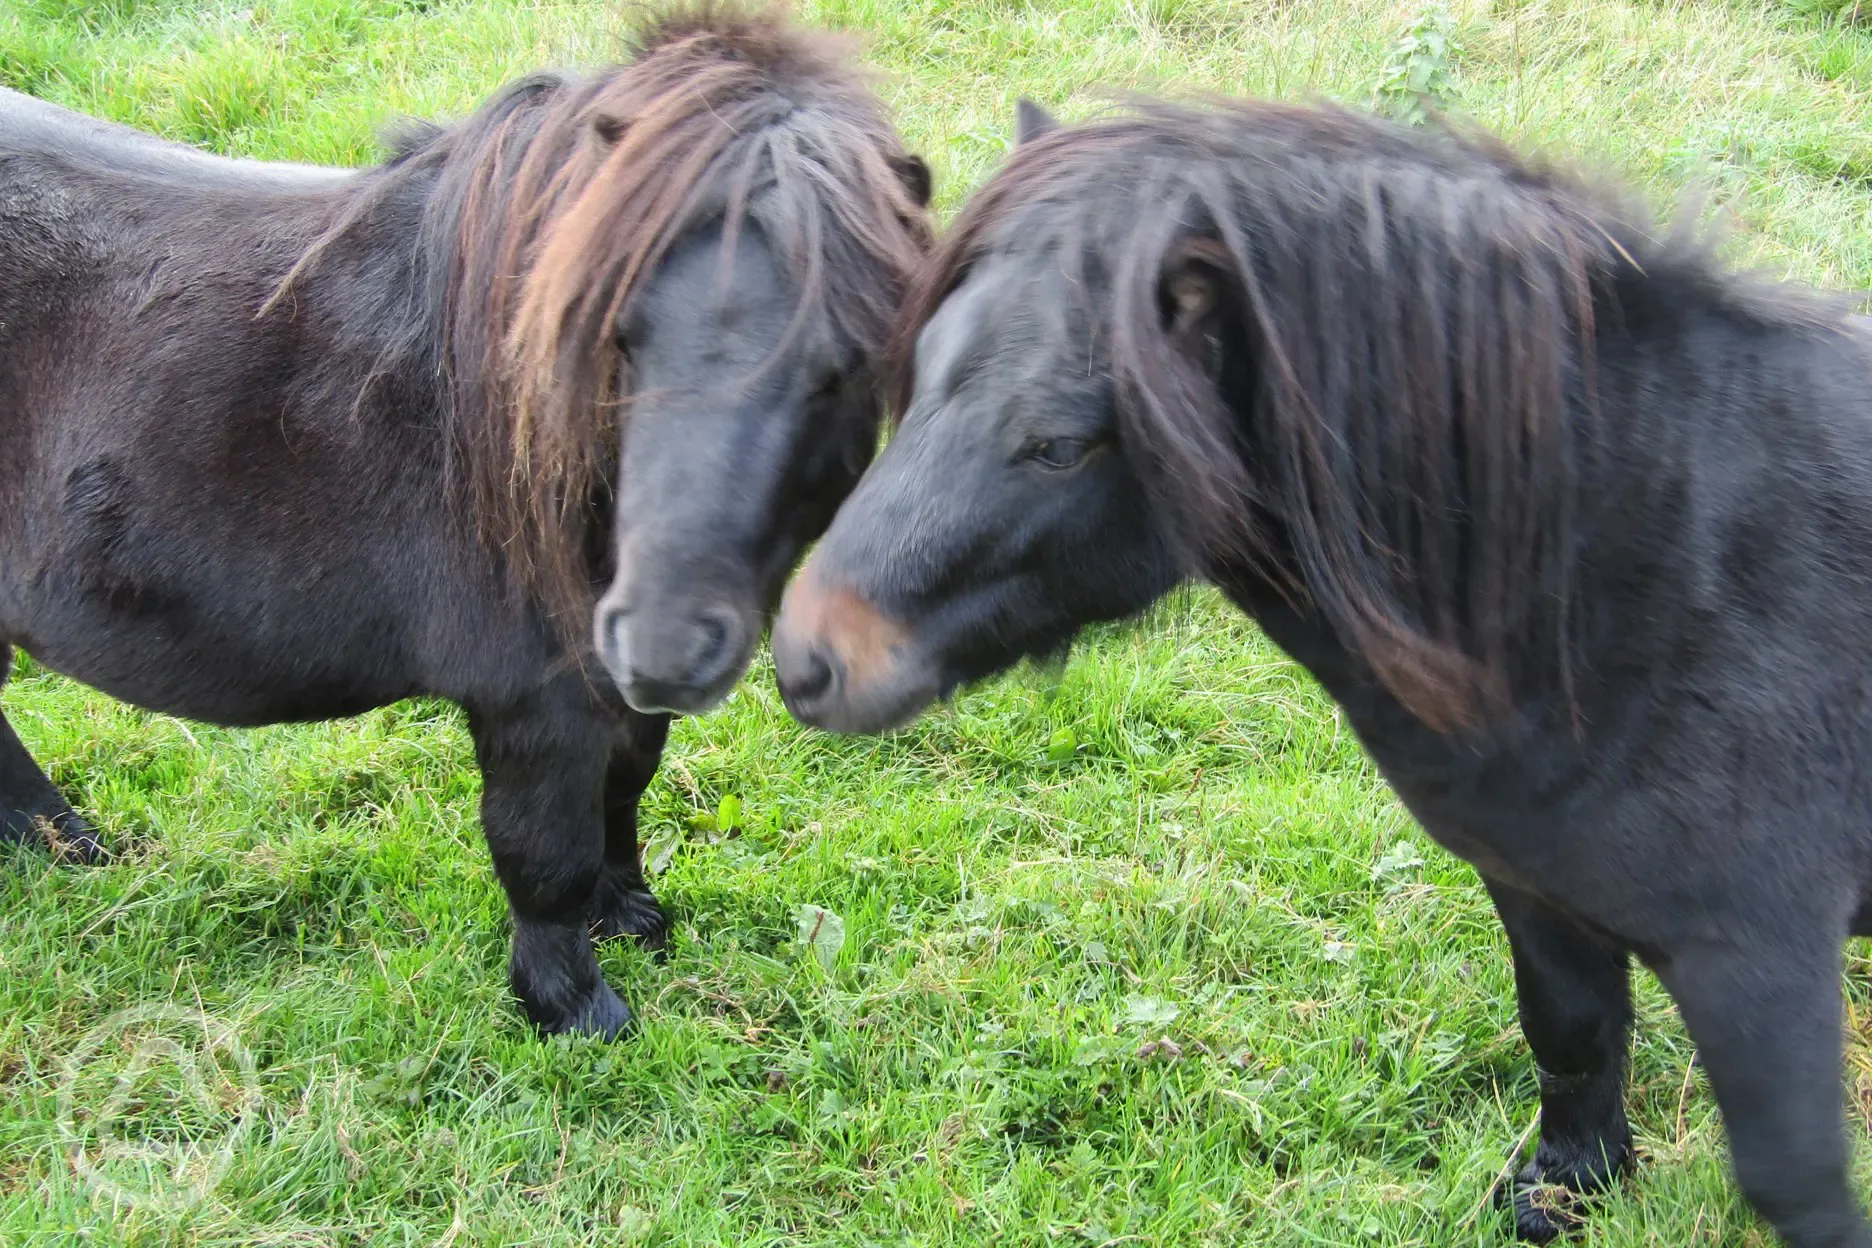 Our Shetland Ponies give rides and love treats in return